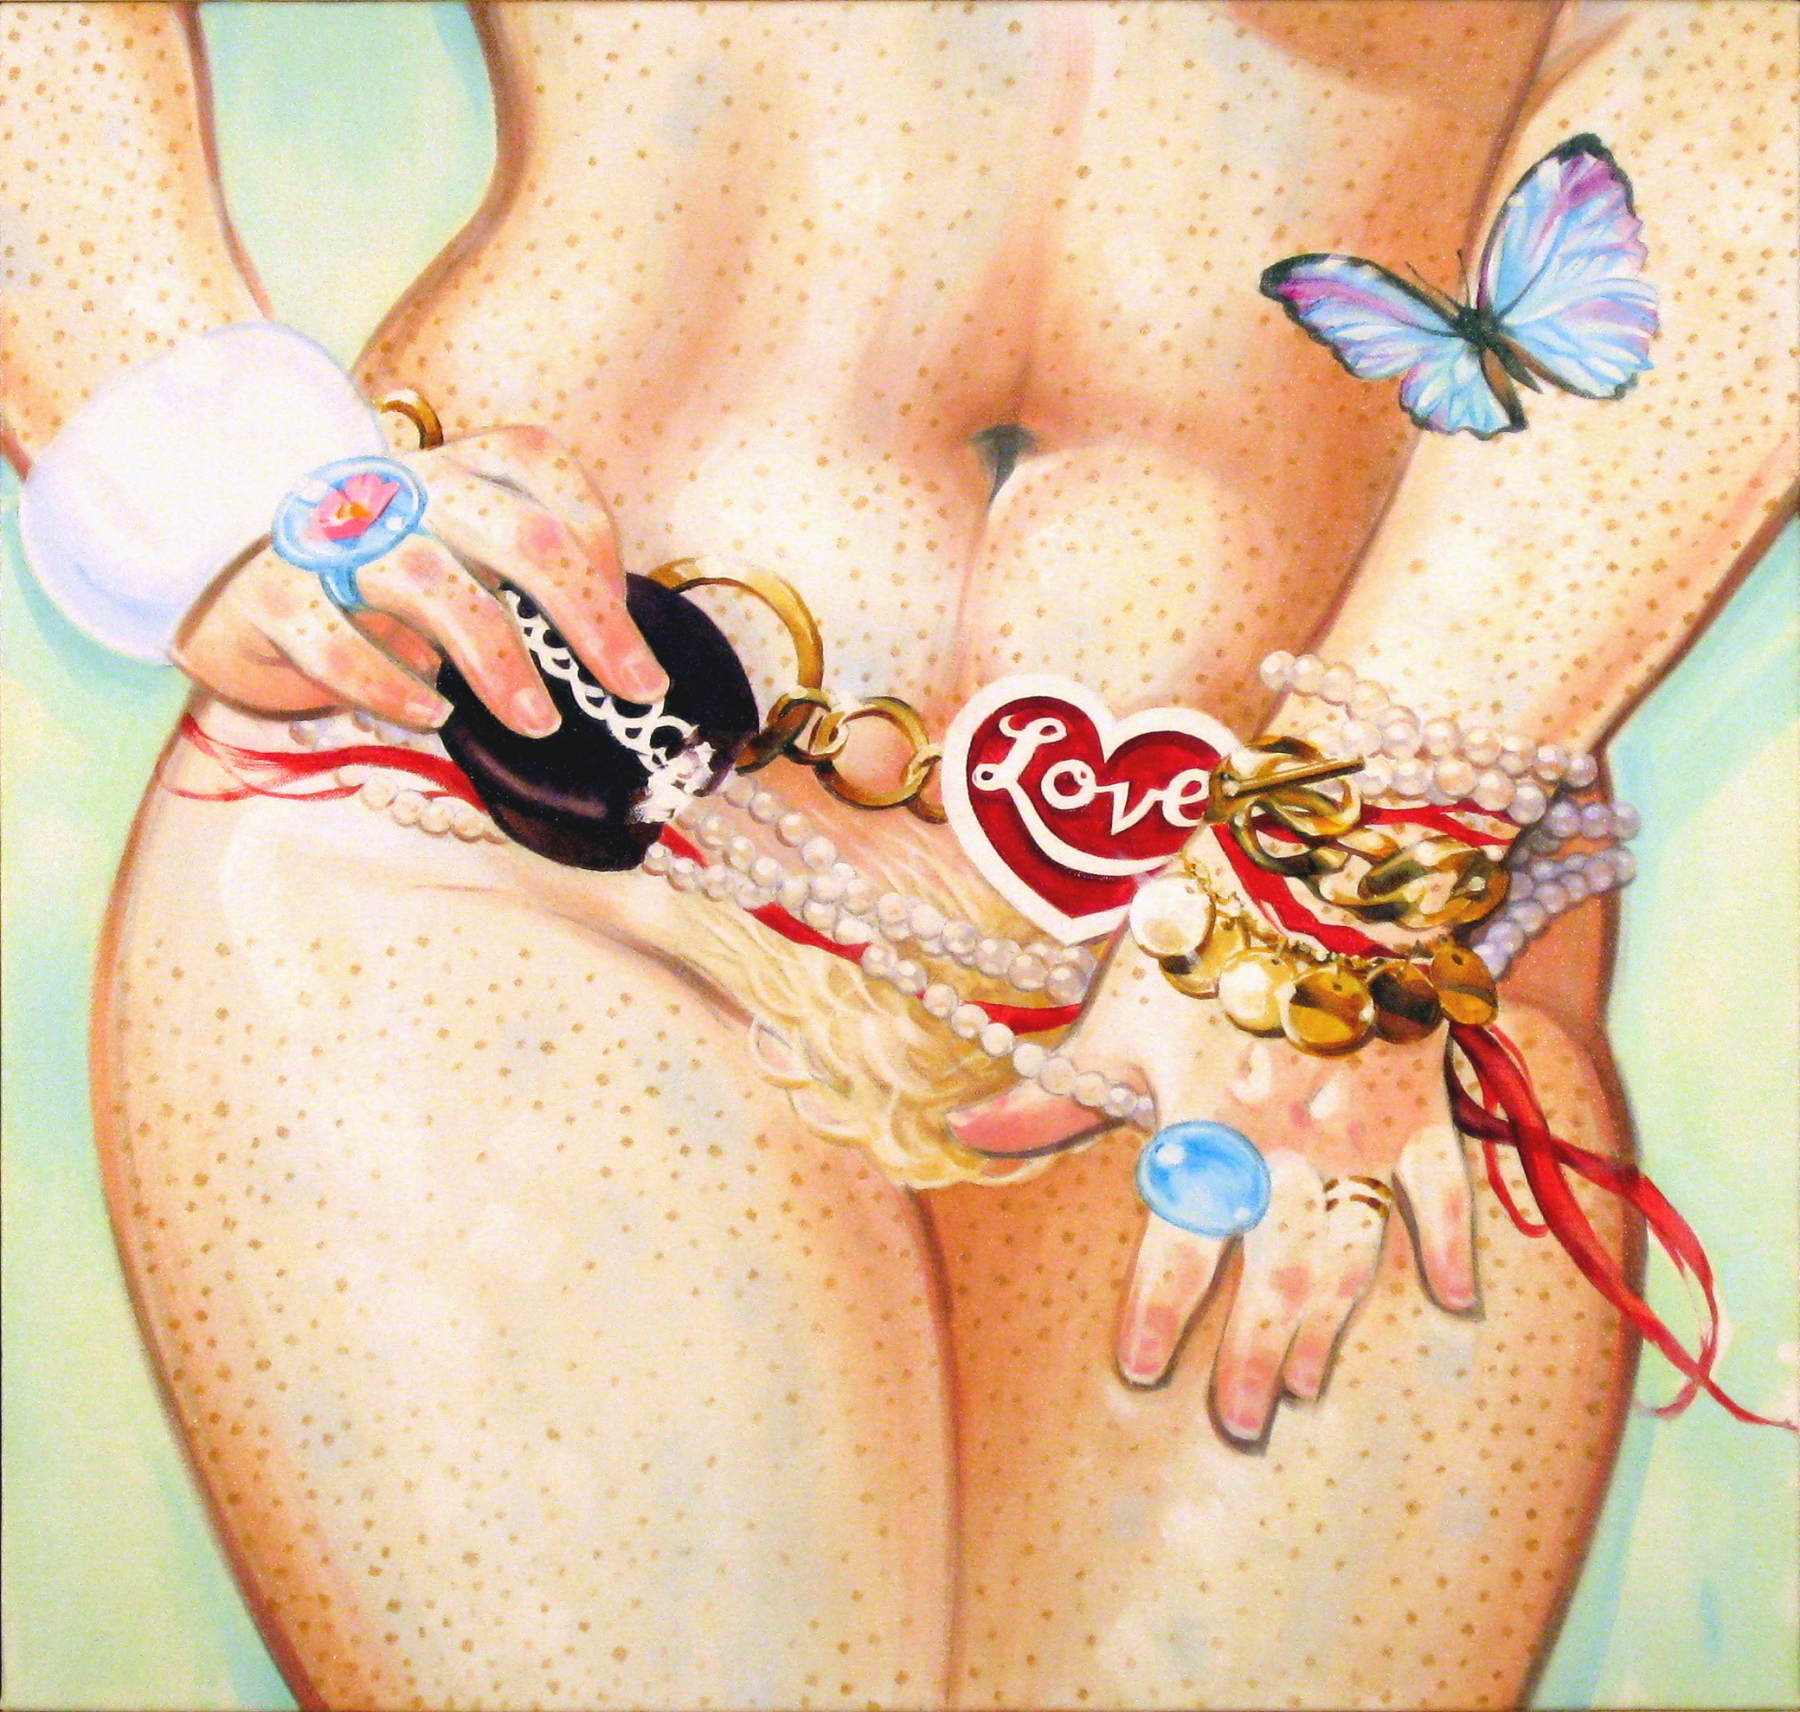 Venus, 2010, courtesy of Heather Lewis, oil on canvas, 21 x 22 inches, by Taiyo la Paix